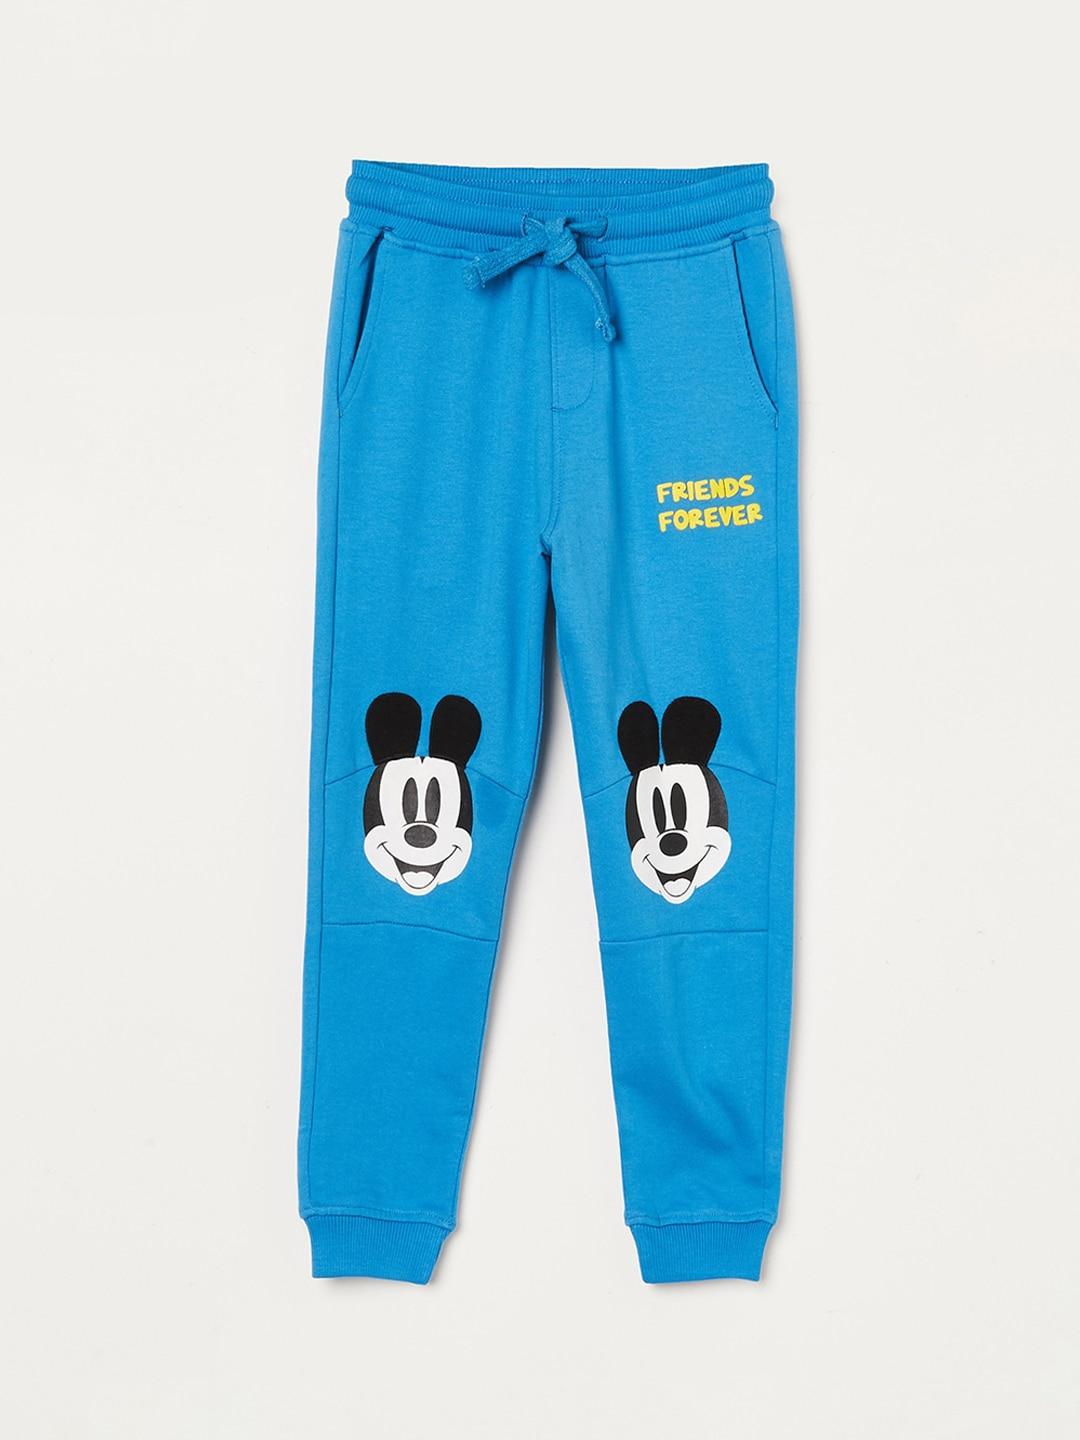 juniors-by-lifestyle-boys-mickey-&-friends-printed-track-pants